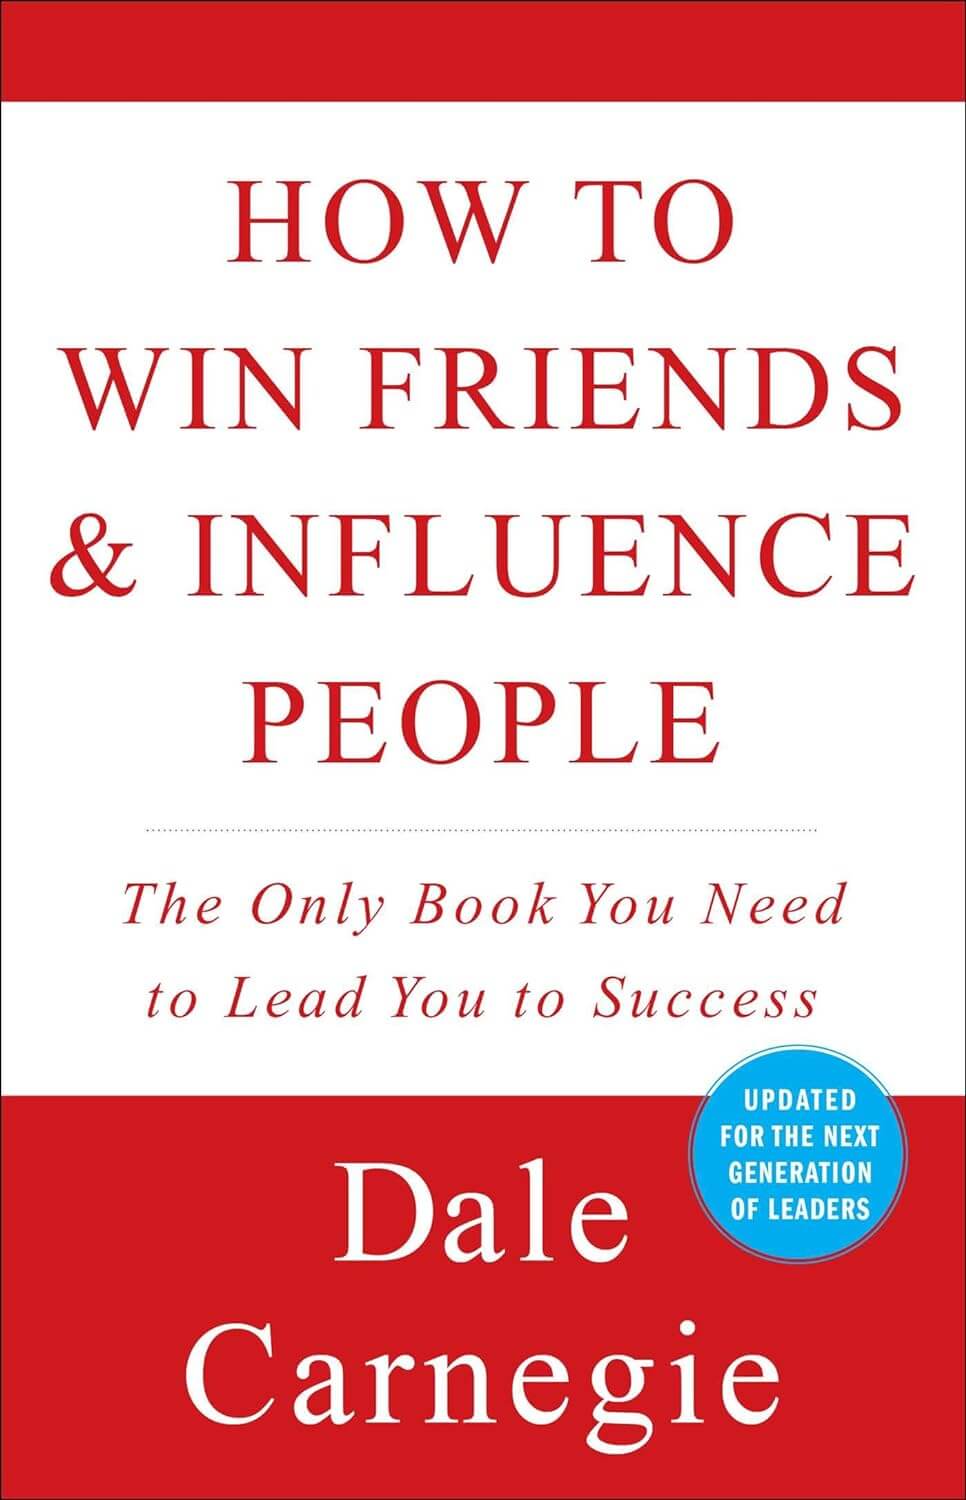 5. Dale Carnegie - 'How to Win Friends and Influence People' 🤝